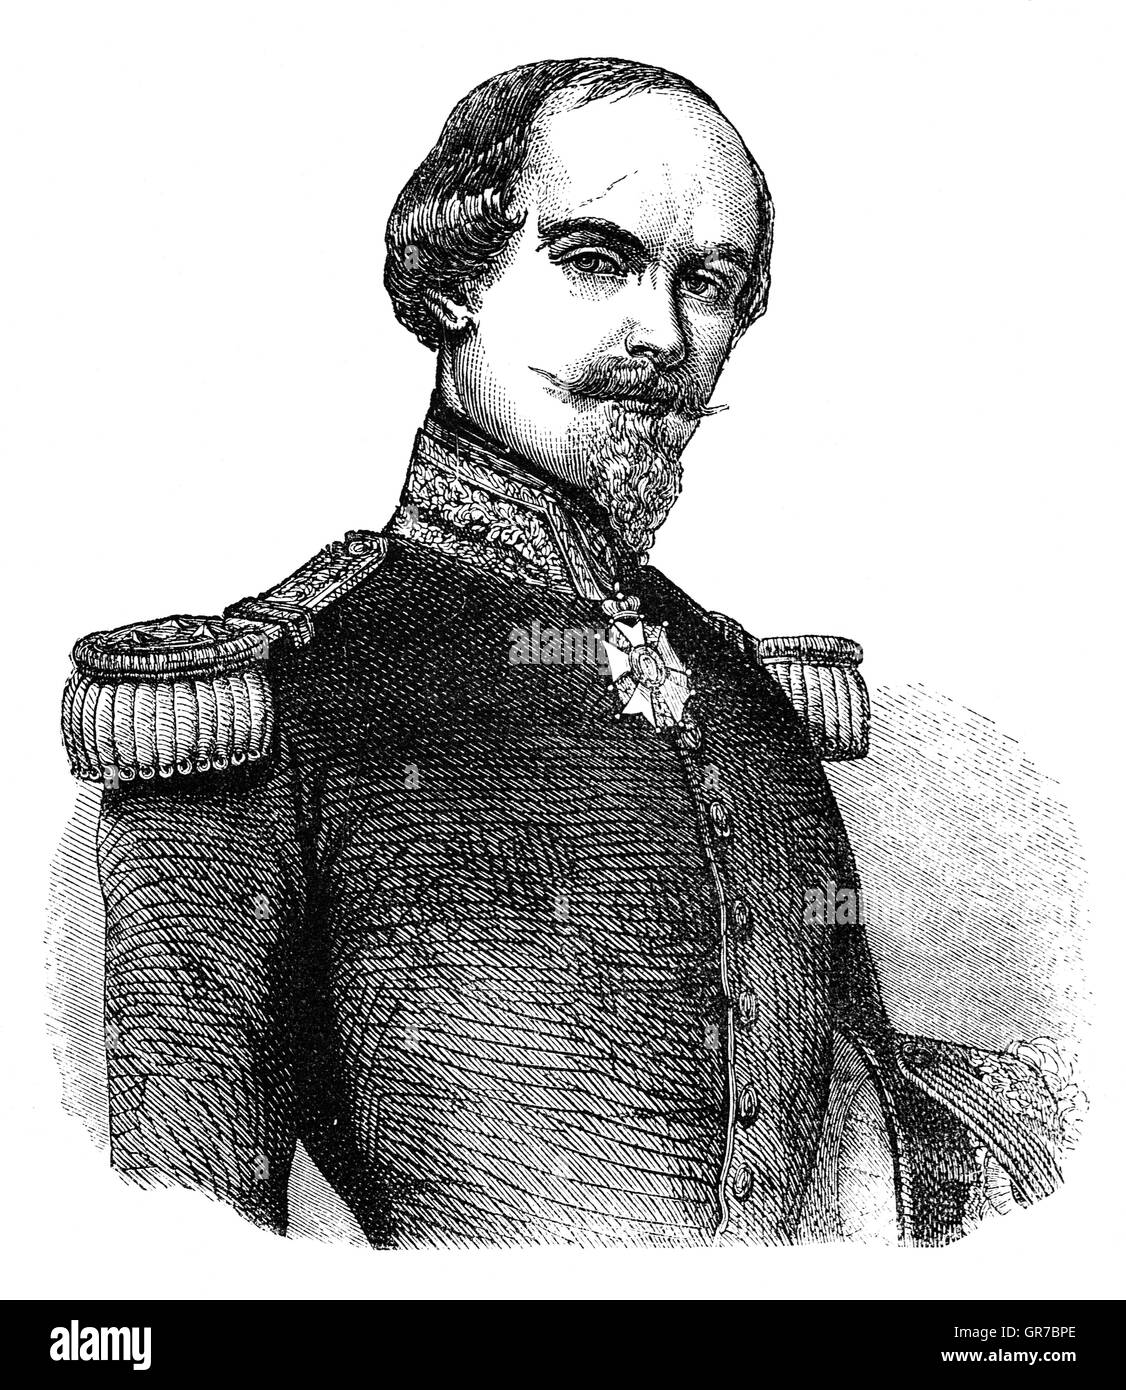 François Certain de Canrobert, usually known as François Certain-Canrobert and later simply as Maréchal Canrobert (27 June 1809 – 28 January 1895), was a marshal of France. In the Crimean War he commanded a division at the Battle of Alma, where he was twice wounded. Stock Photo